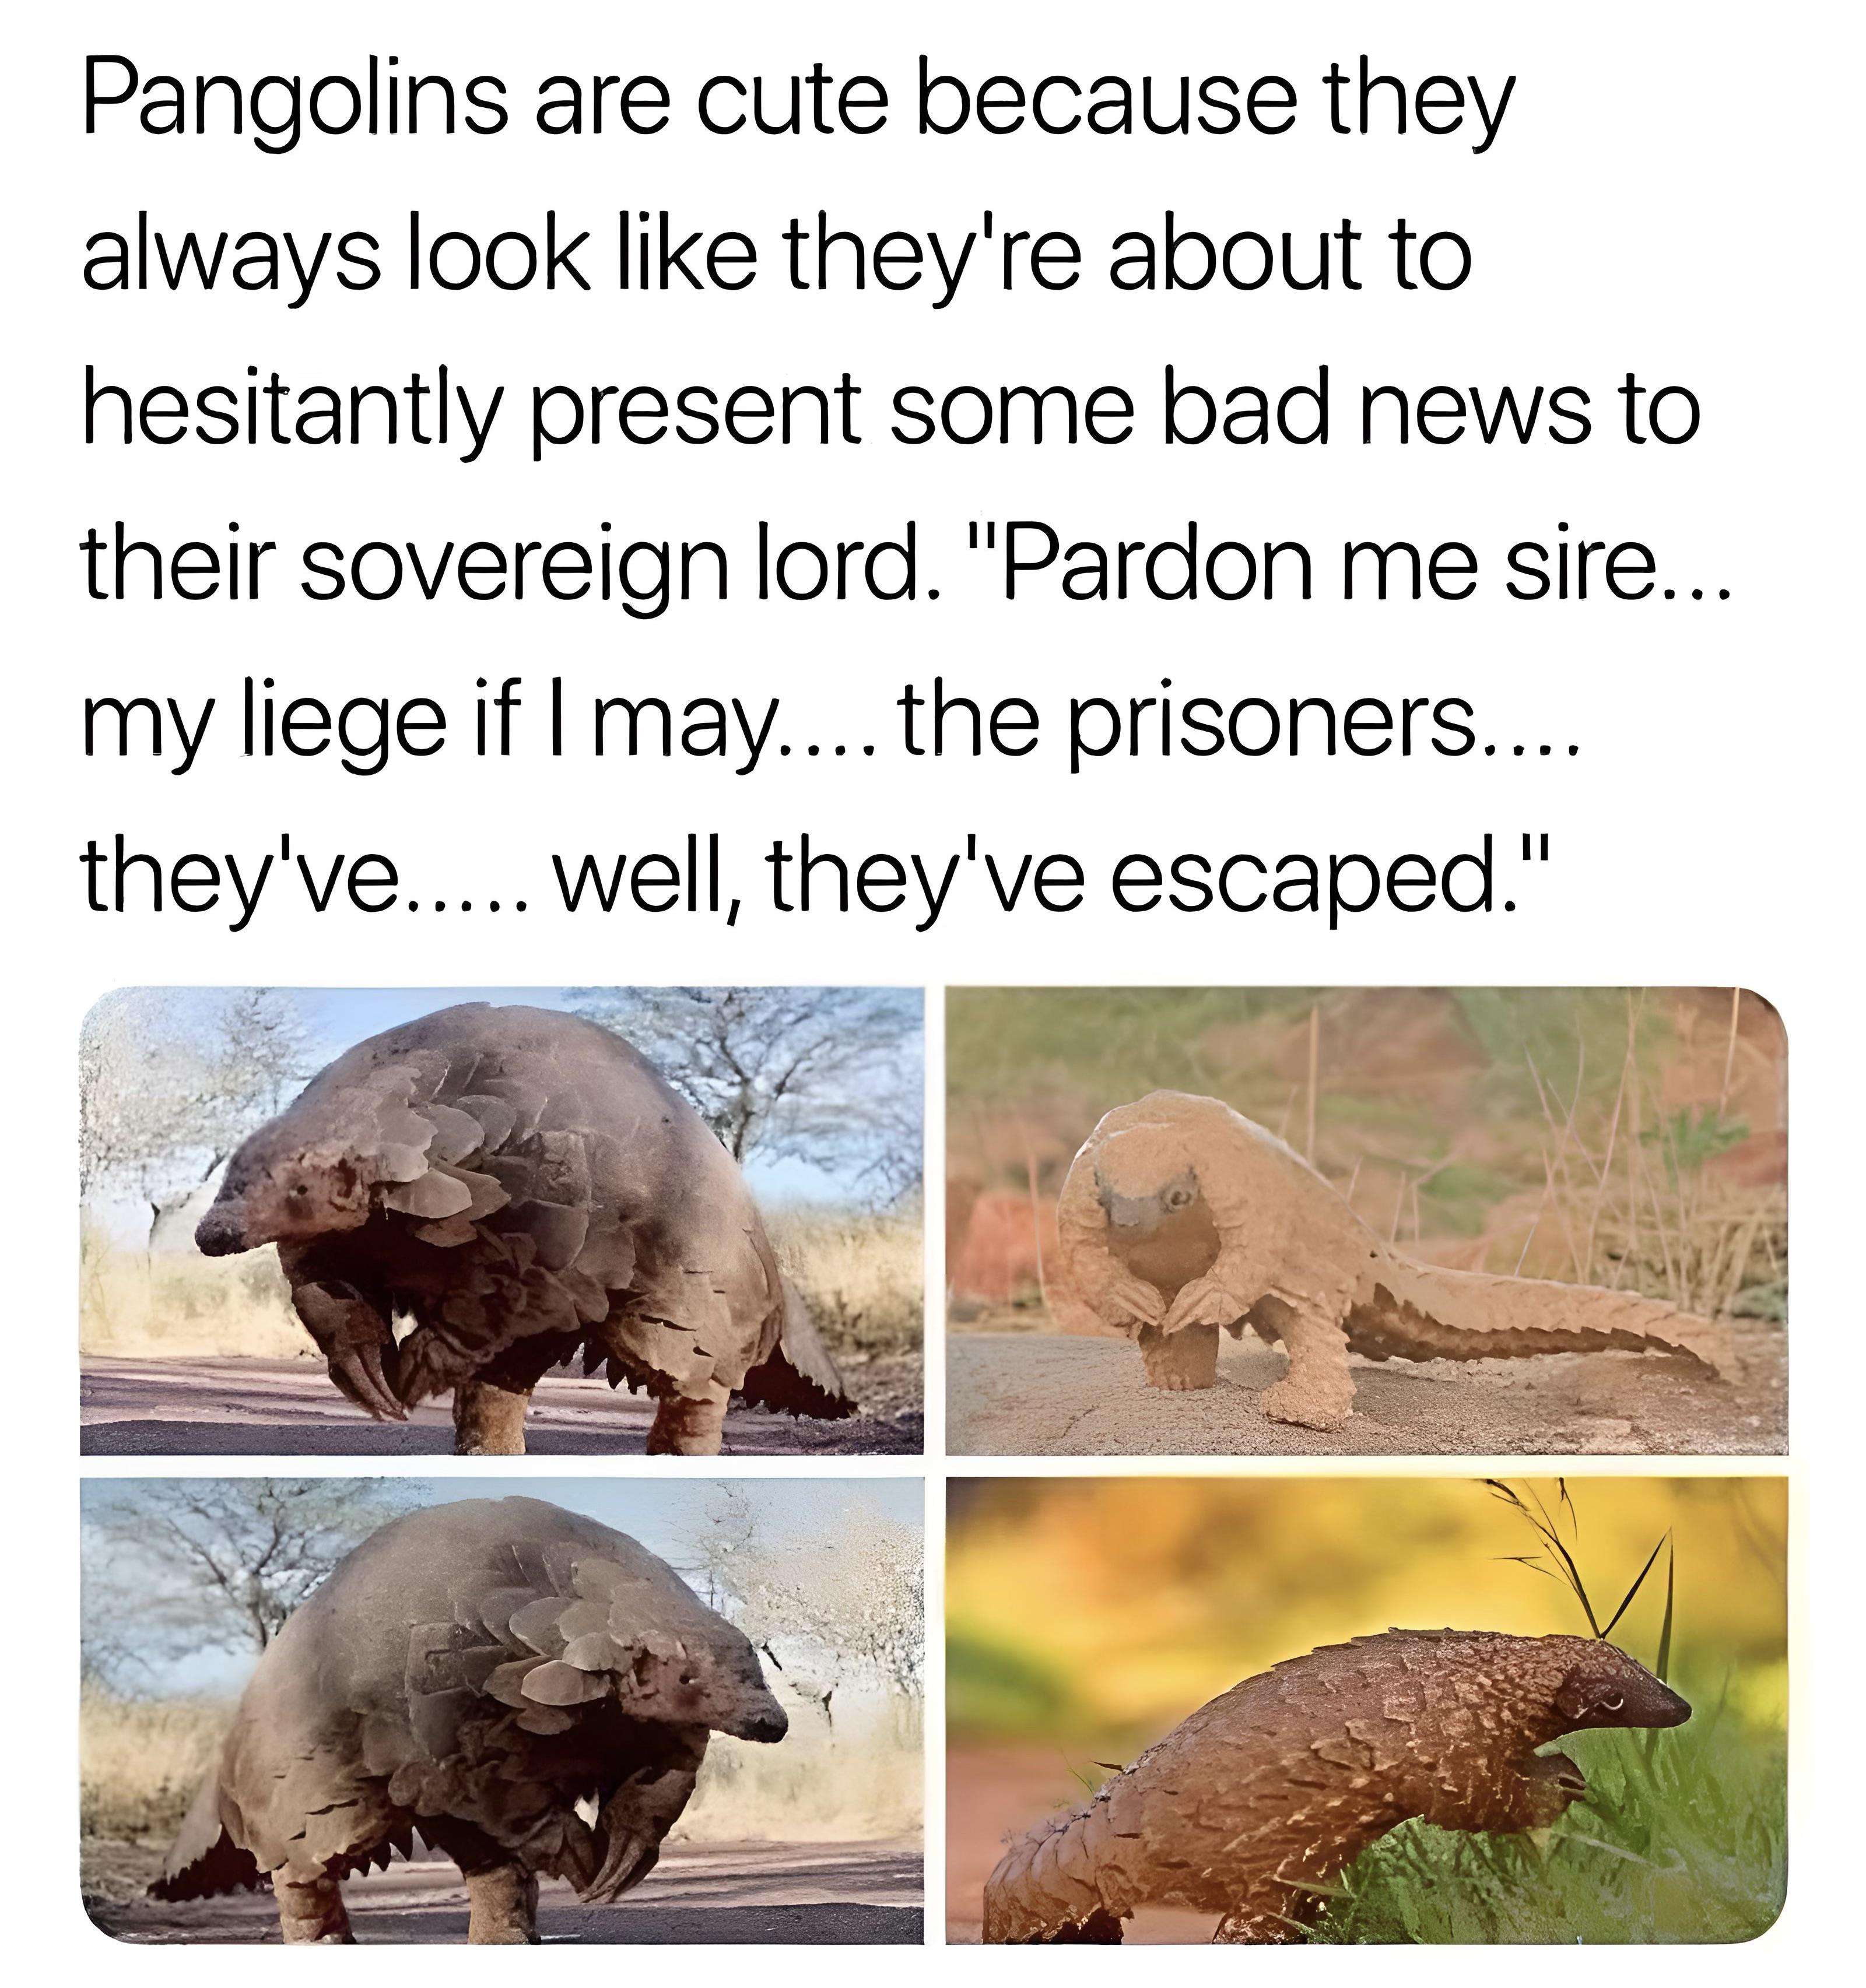 funny dank memes - pangolin my lord - Pangolins are cute because they always look they're about to hesitantly present some bad news to their sovereign lord. "Pardon me sire... my liege if I may.... the prisoners.... they've..... well, they've escaped."